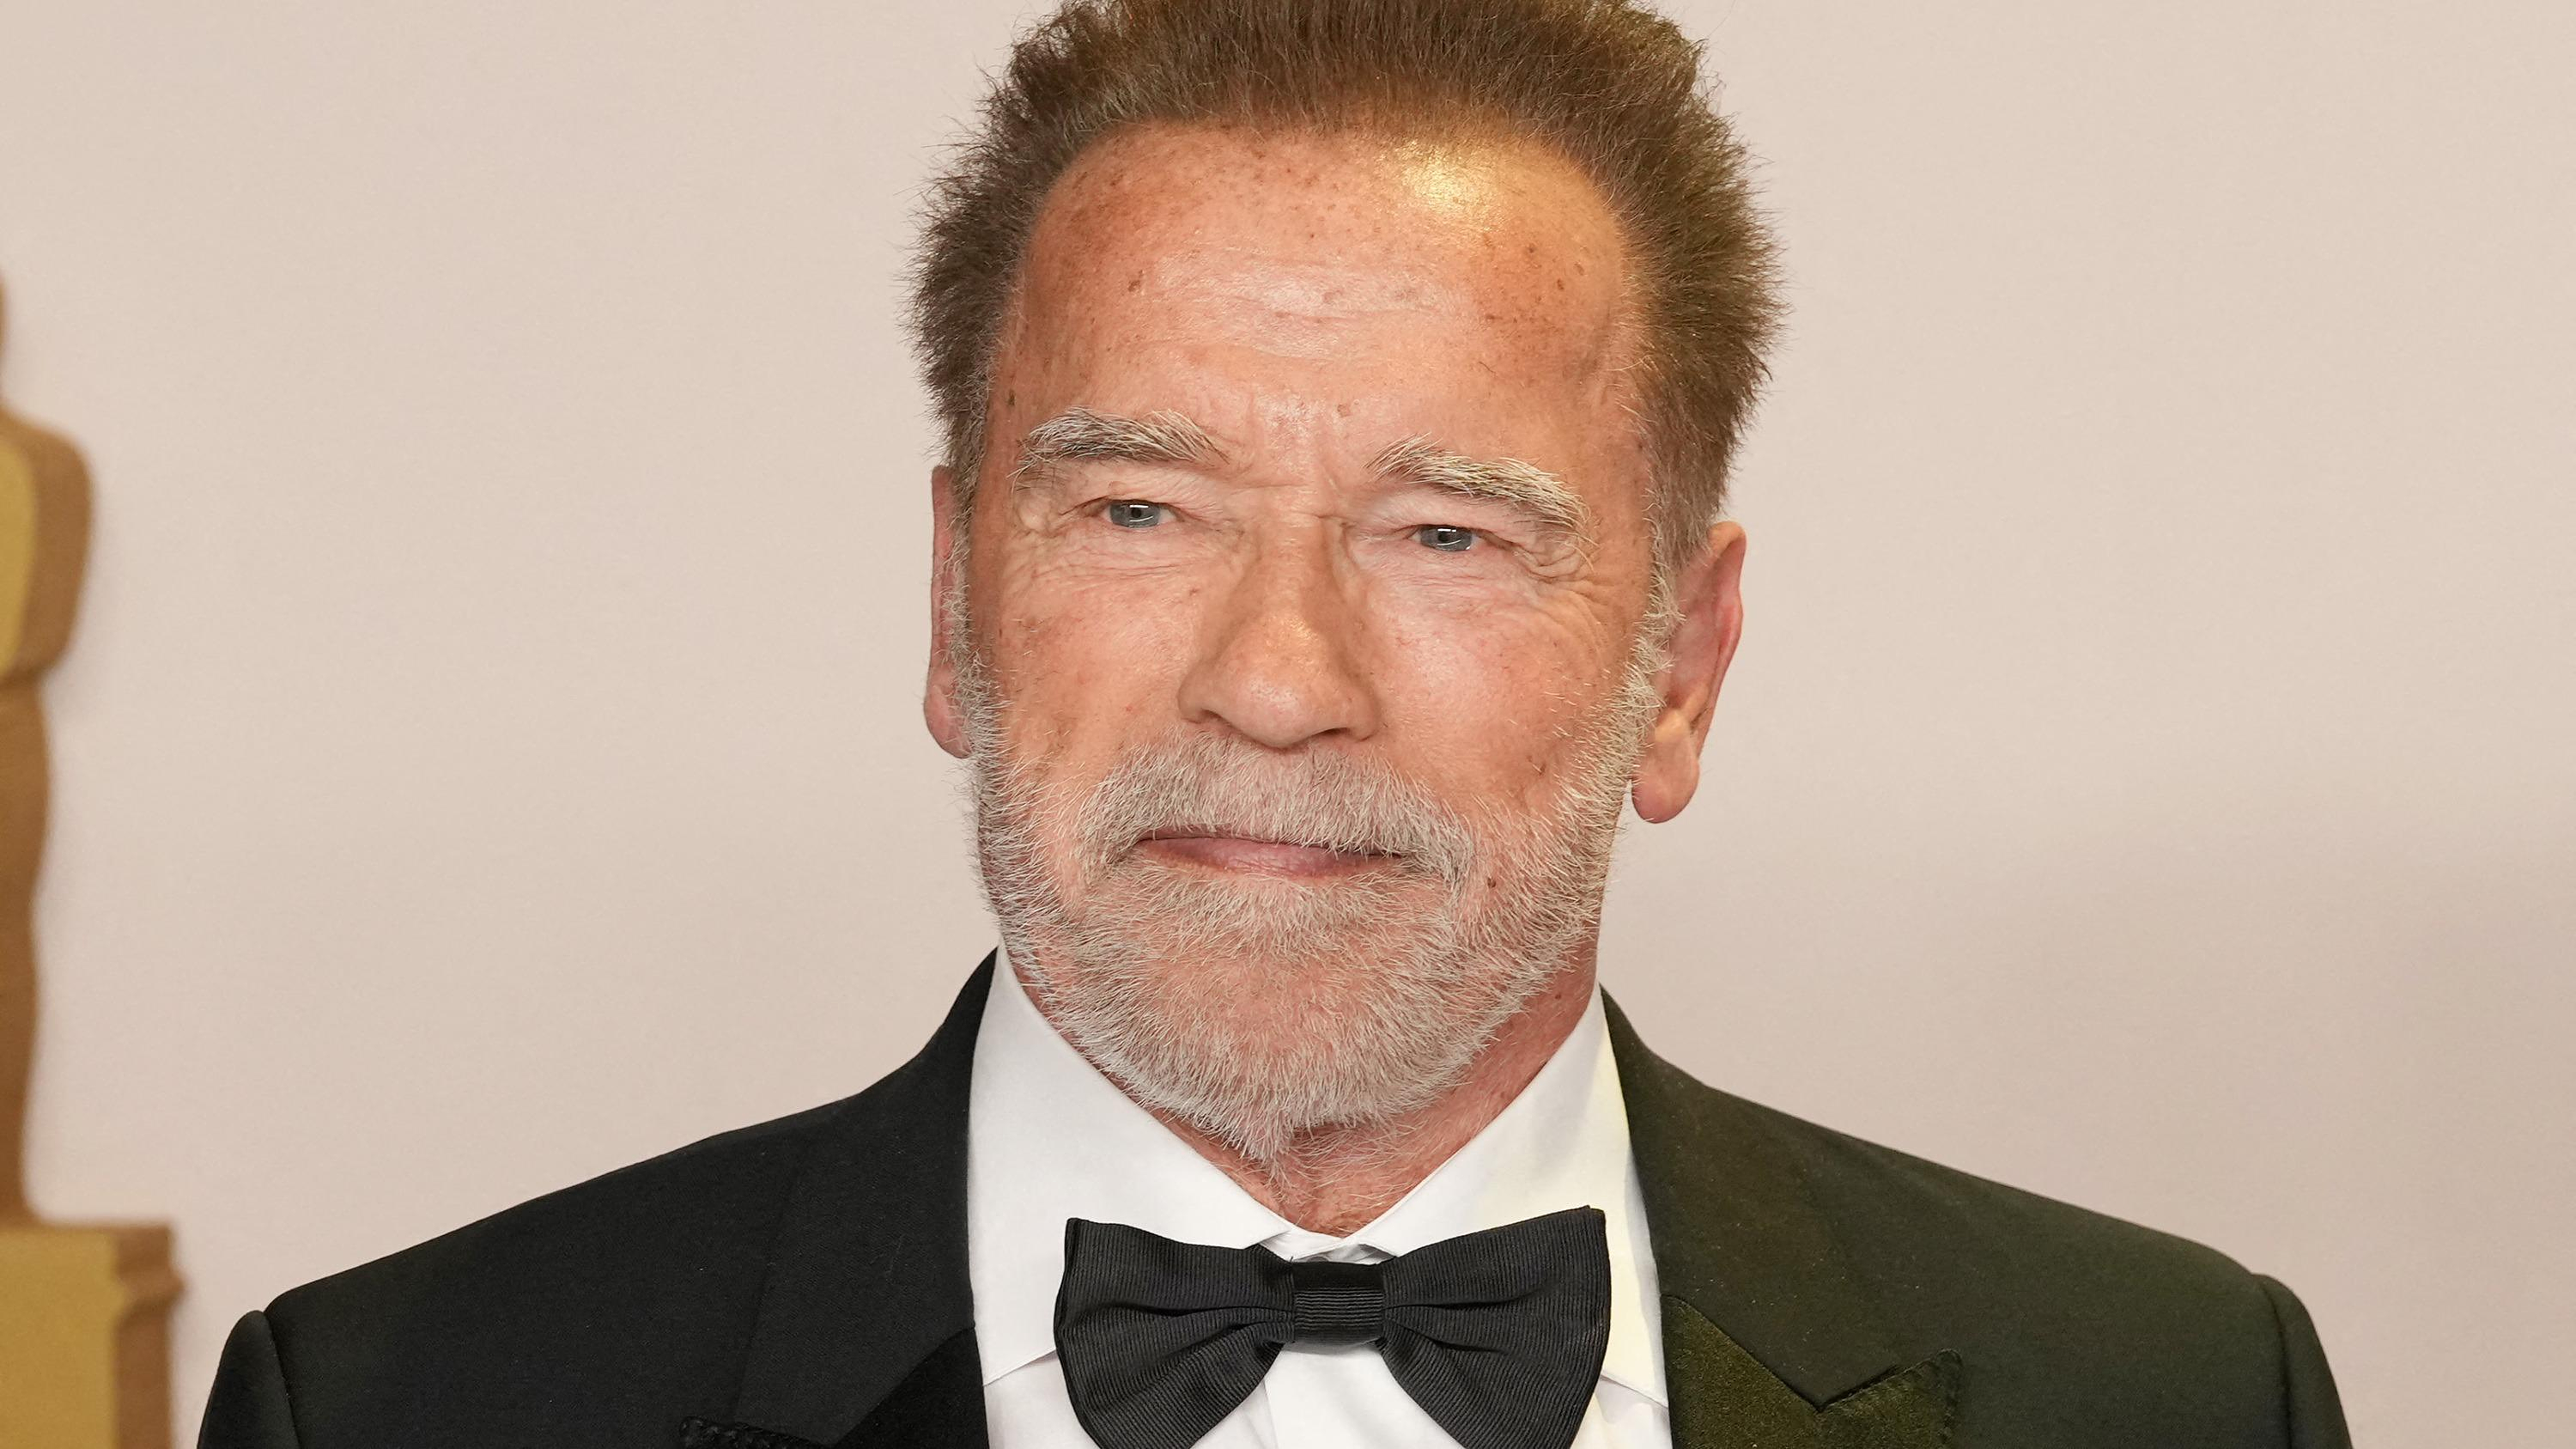 Arnold Schwarzenegger had a pacemaker fitted and became “a little more of a machine”